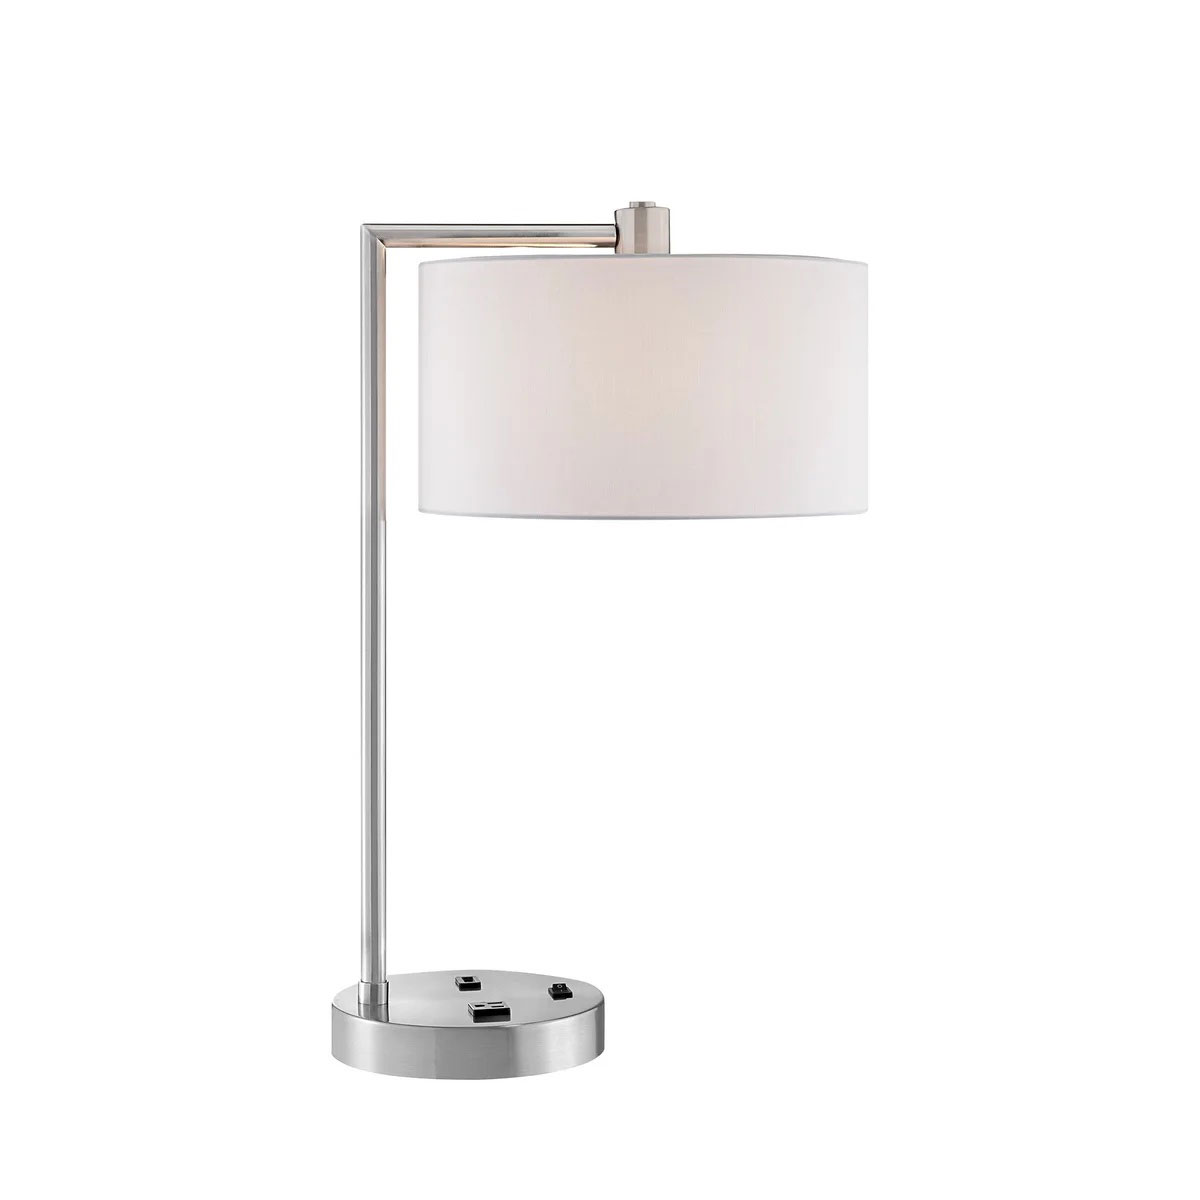 Lexiana_Table_Lamp_with_USB_PORTS